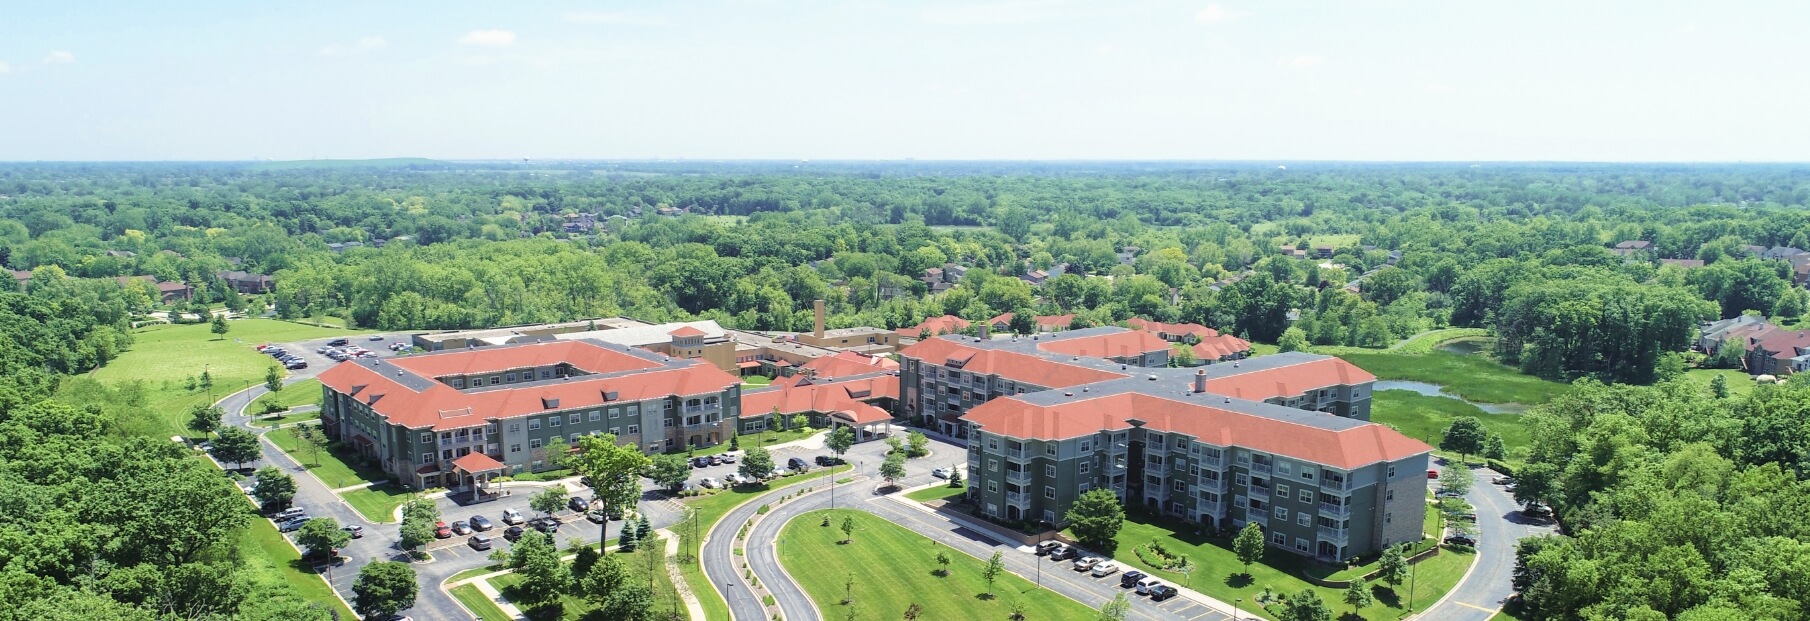 The Oaks at Bartlett | Exterior aerial view